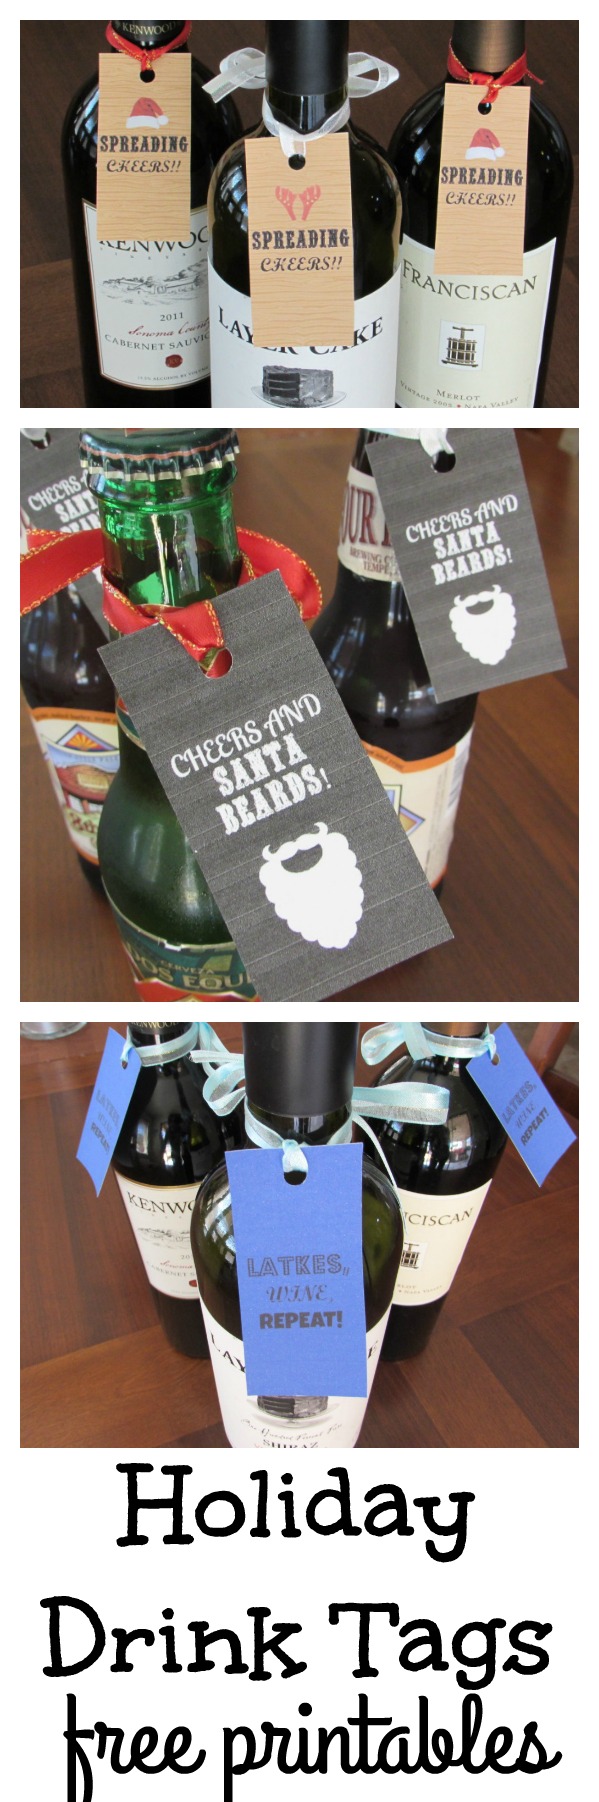 Holiday Drink Tags. Free printables for the holidays!